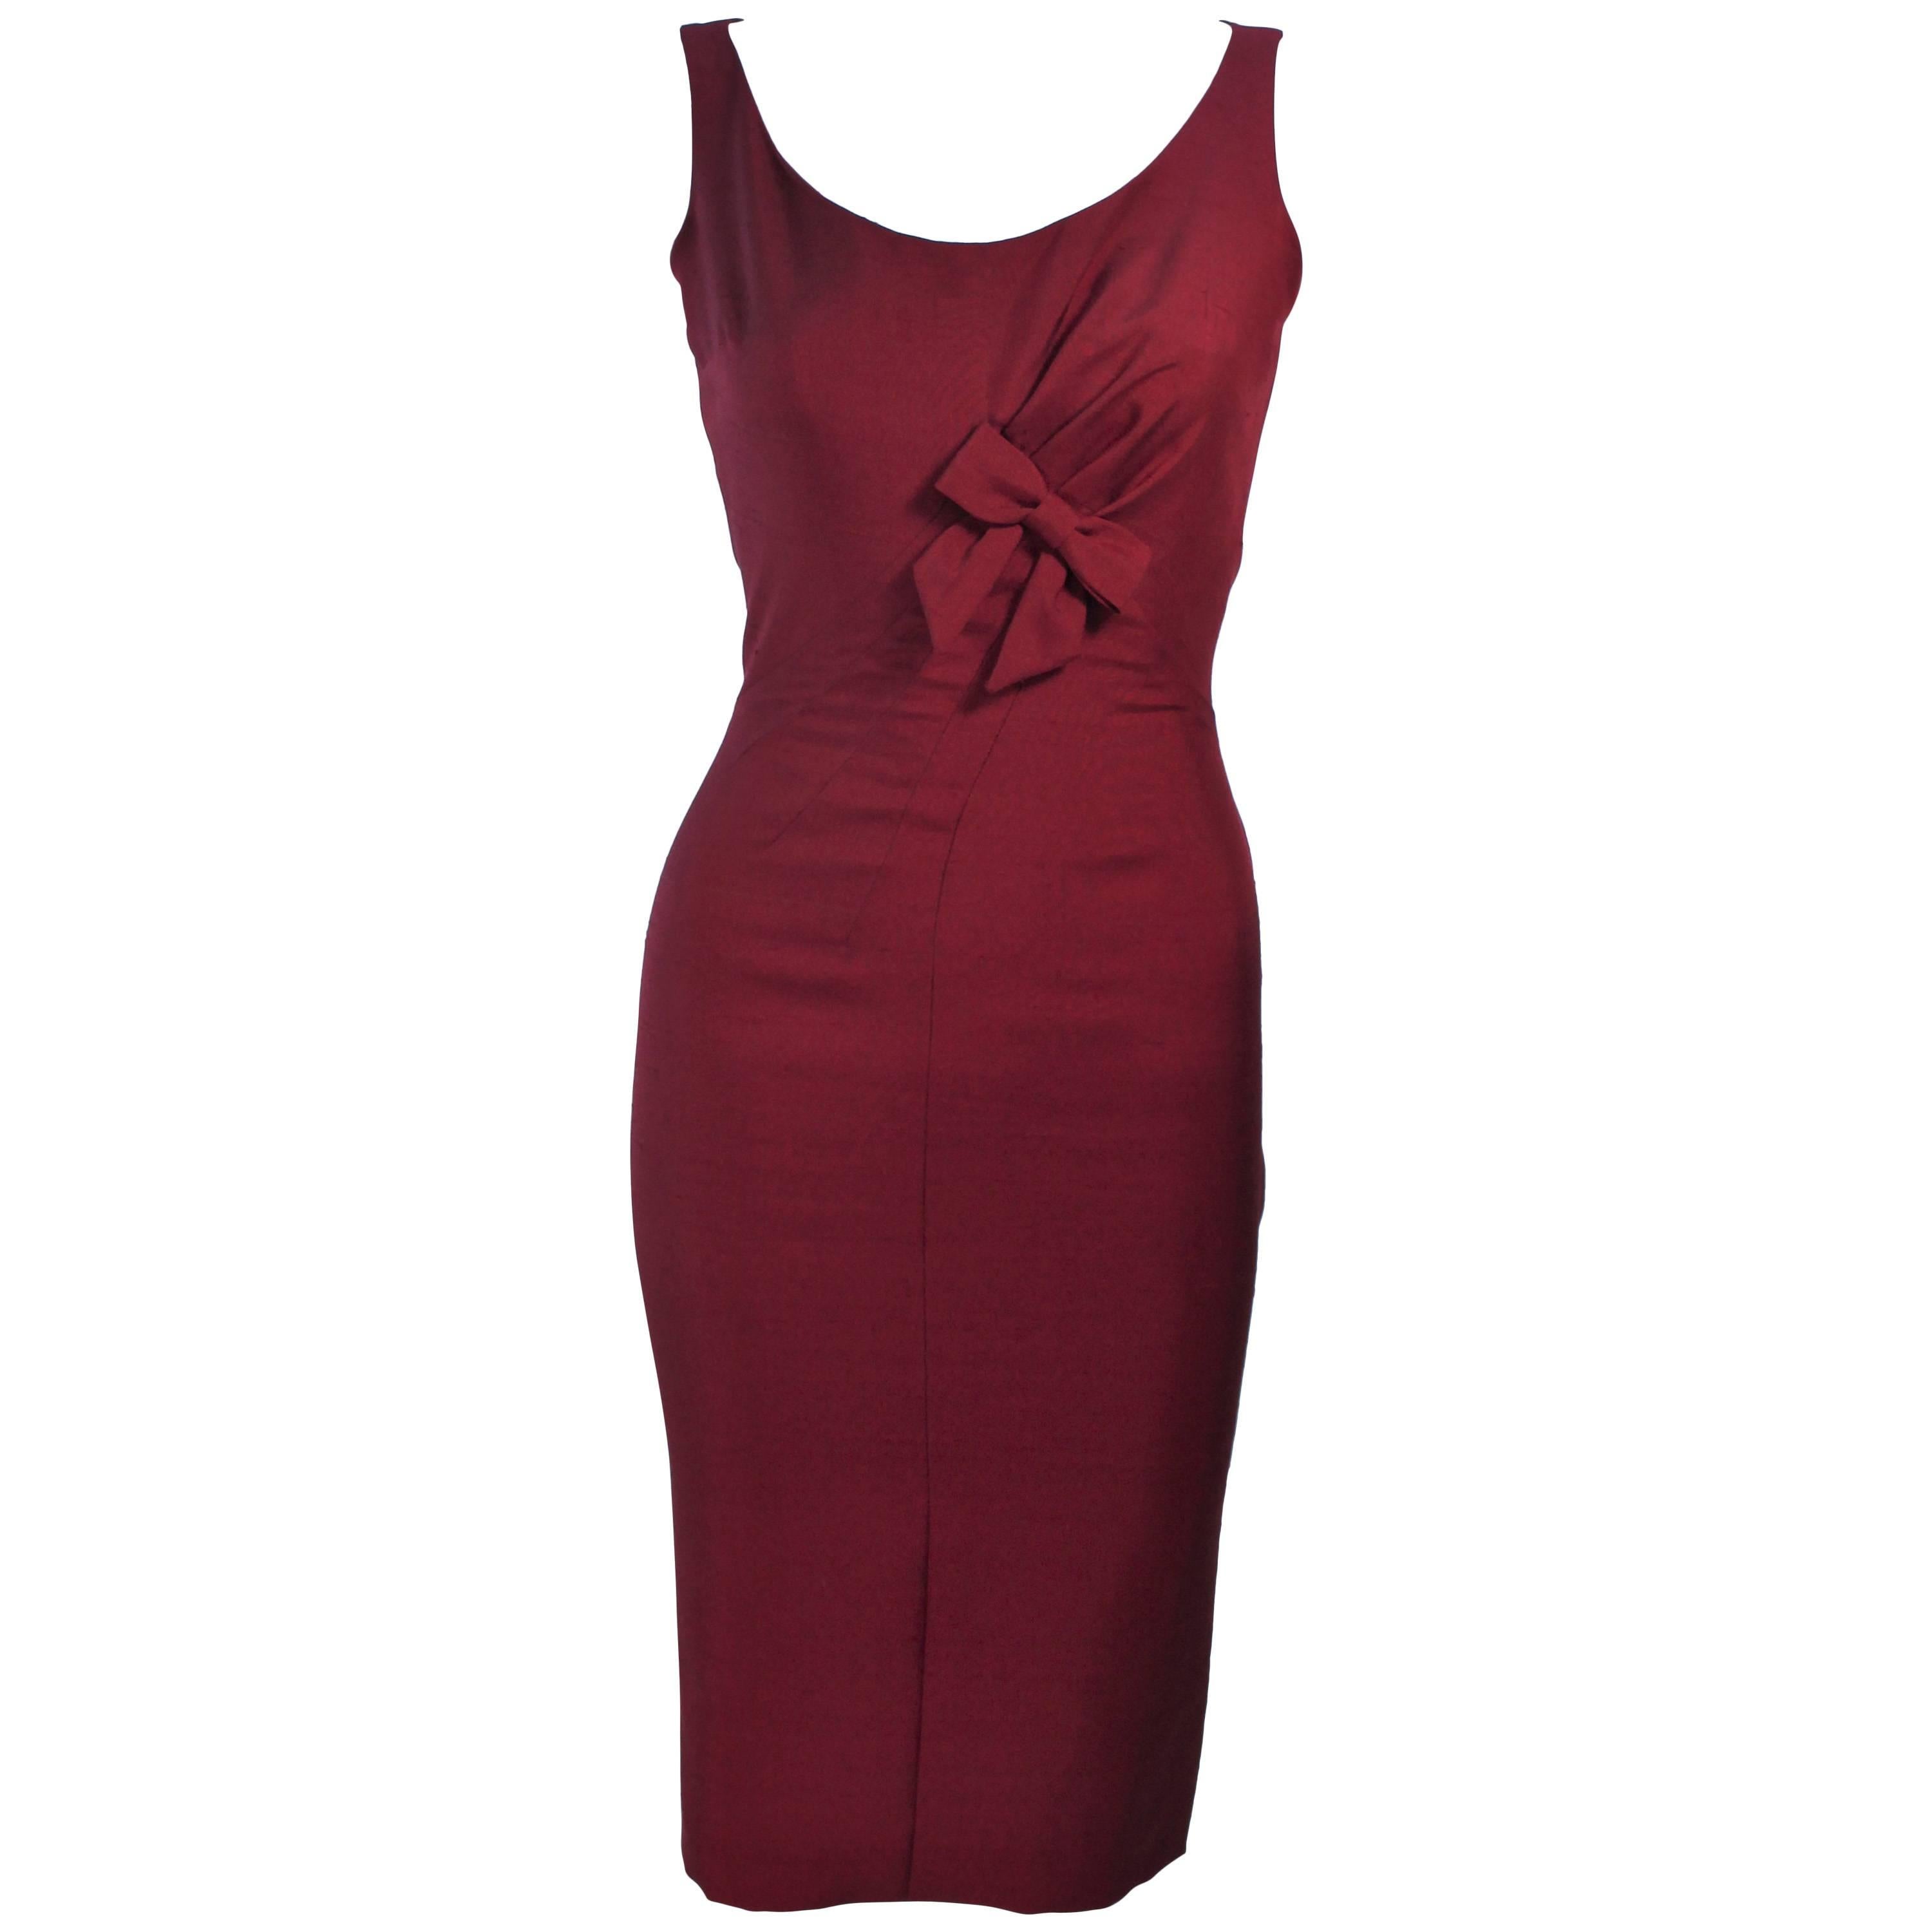 ELIZABETH MASON COUTURE Burgundy Silk Cocktail Dress with Bow Made to Order For Sale